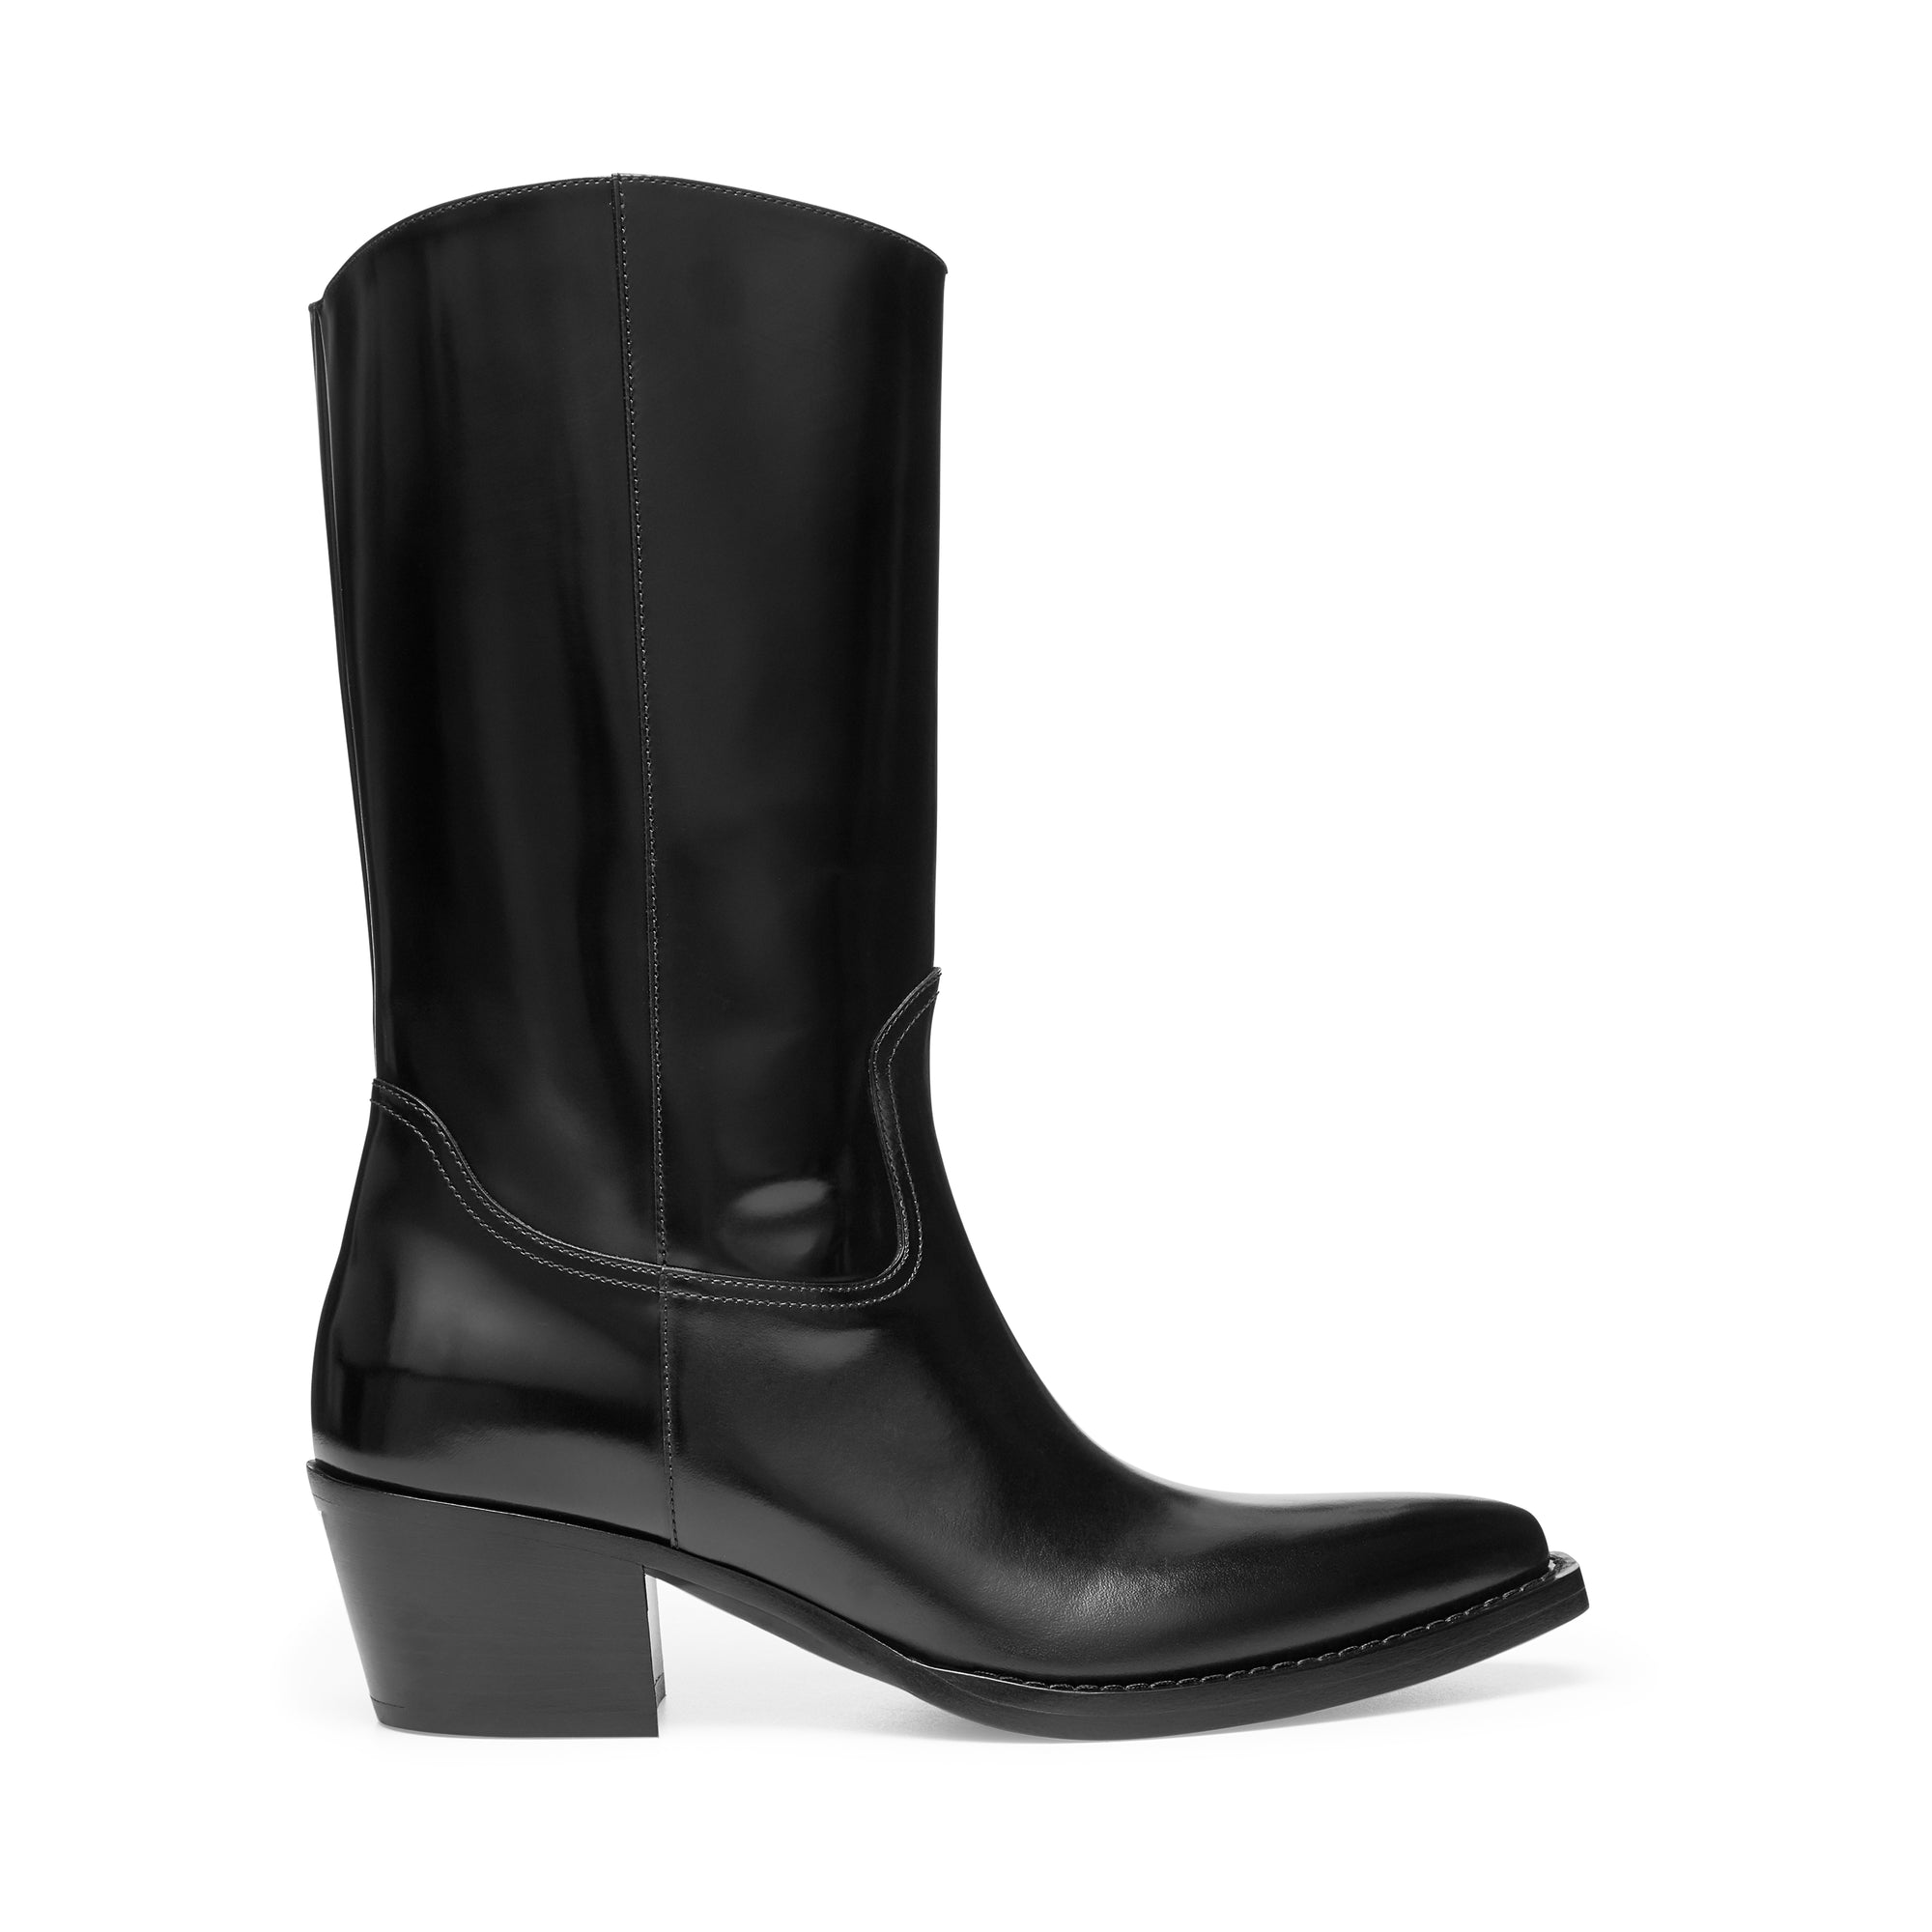 Prada - Women's Brushed Leather Camperos Boots - (Black) view 1